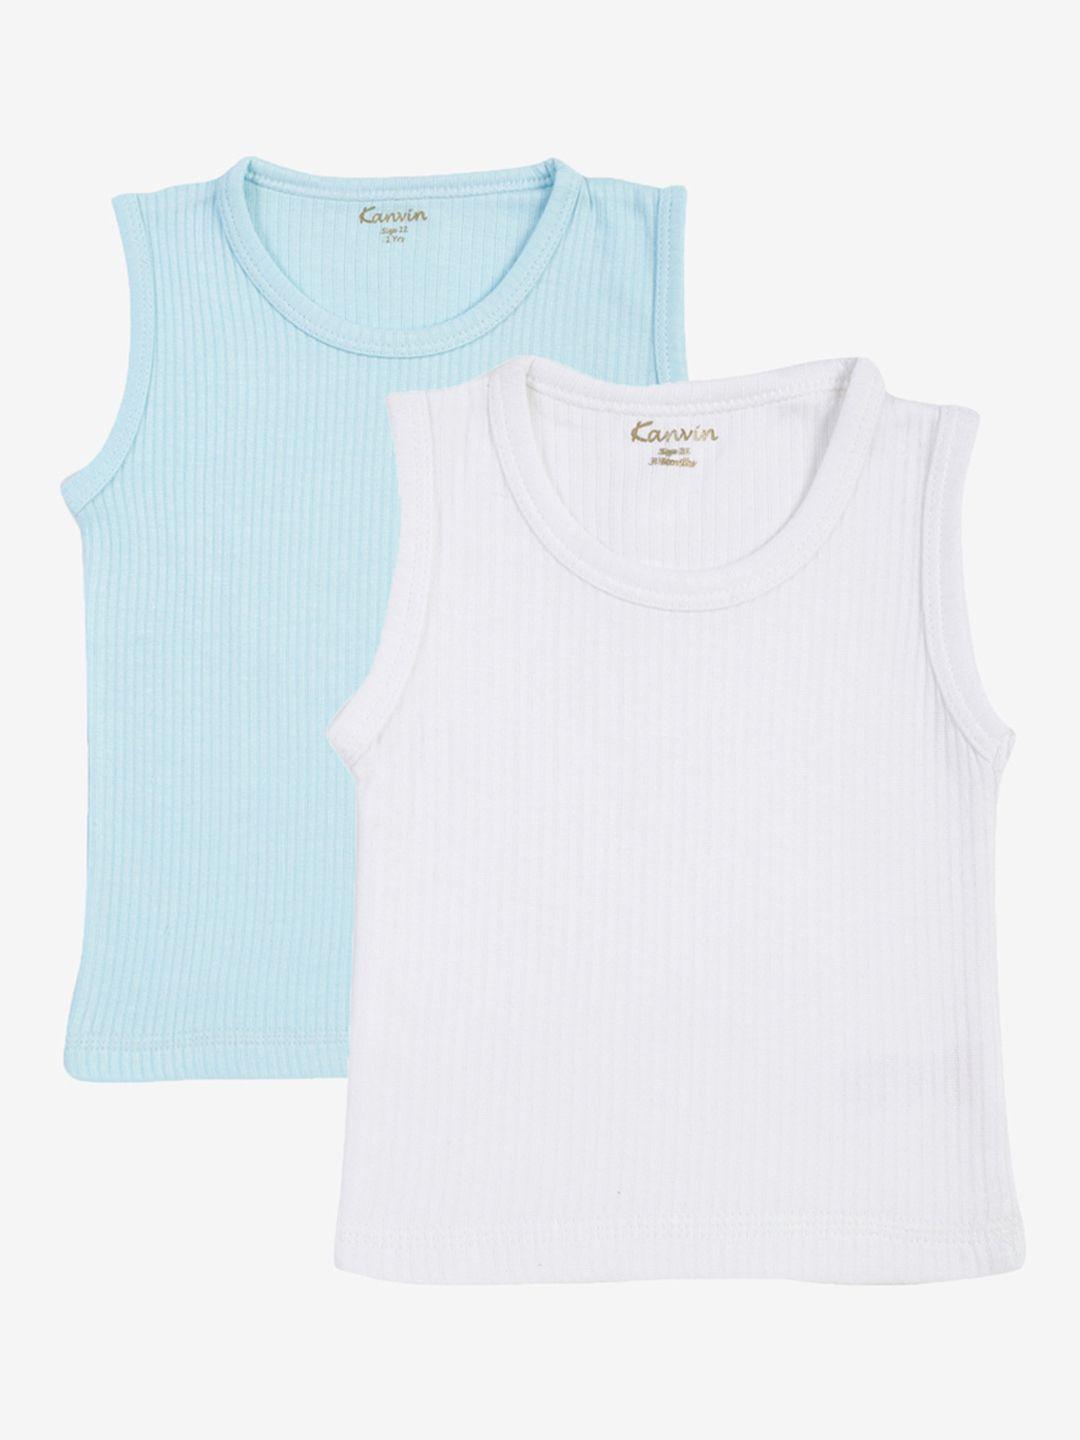 kanvin boys pack of 2 turquoise blue & white cotton ribbed thermal tops